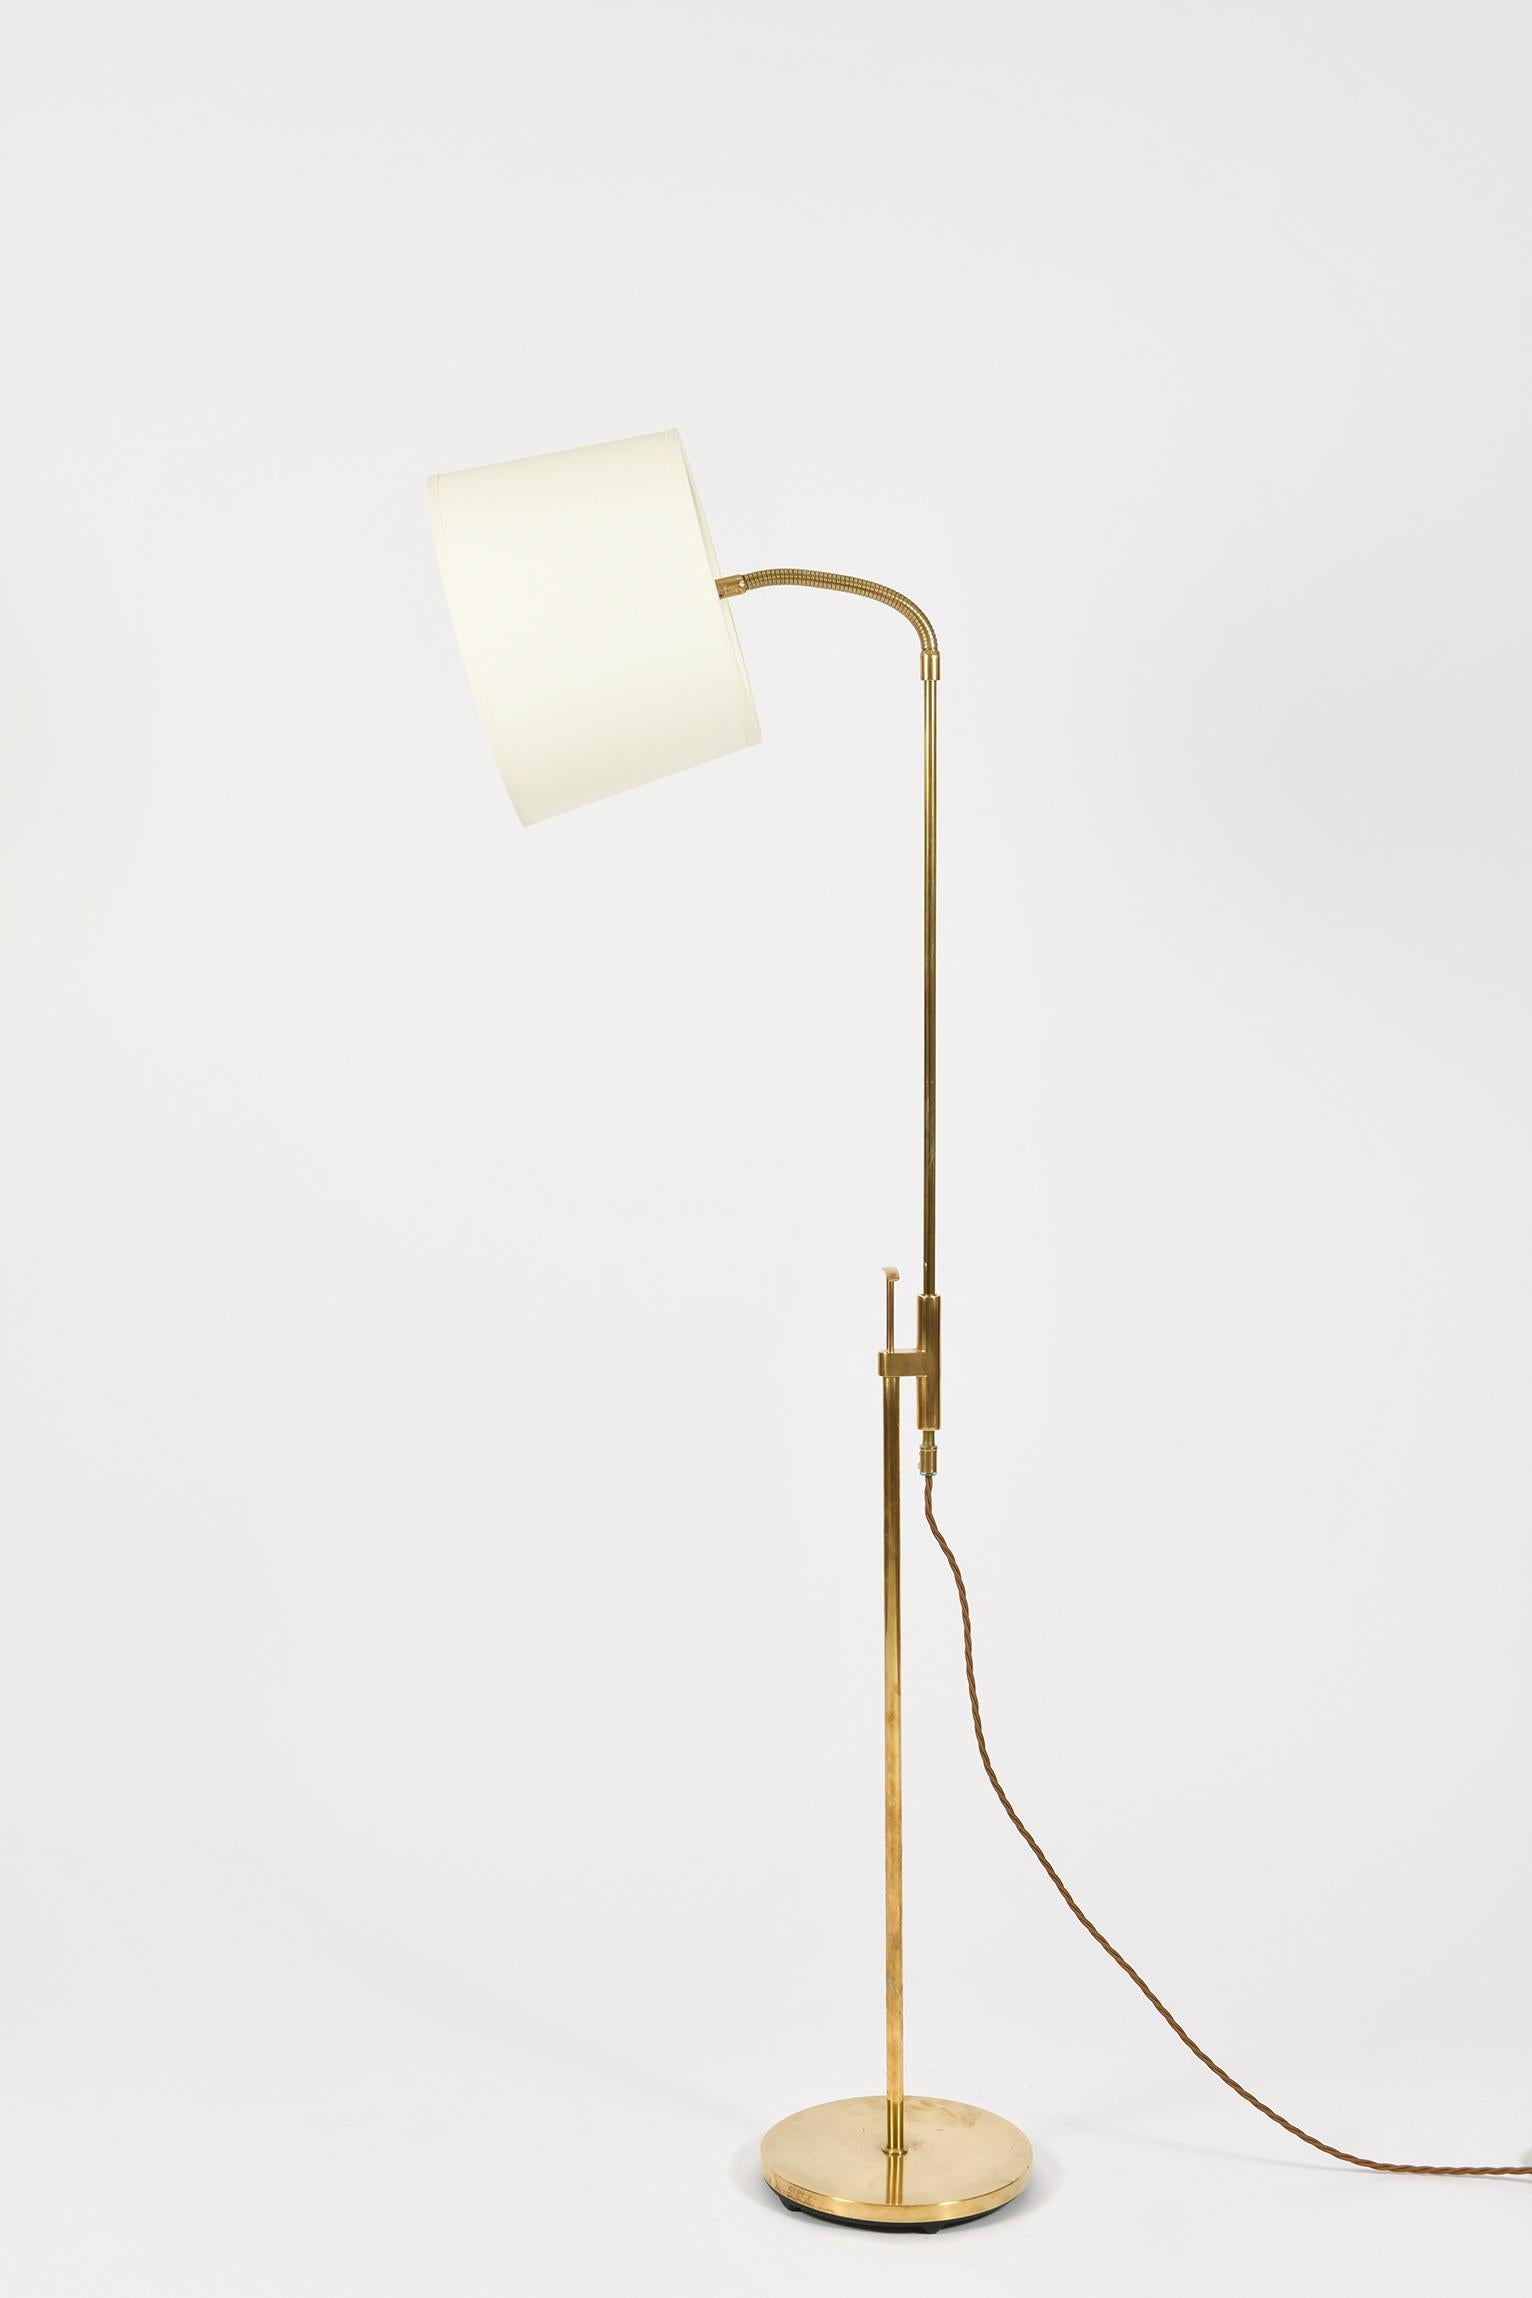 A brass telescopic reading floor lamp by Falkenberg Belysning
the stem, of adjustable height and on a circular base, supporting a gooseneck light.
Sweden, circa 1970.